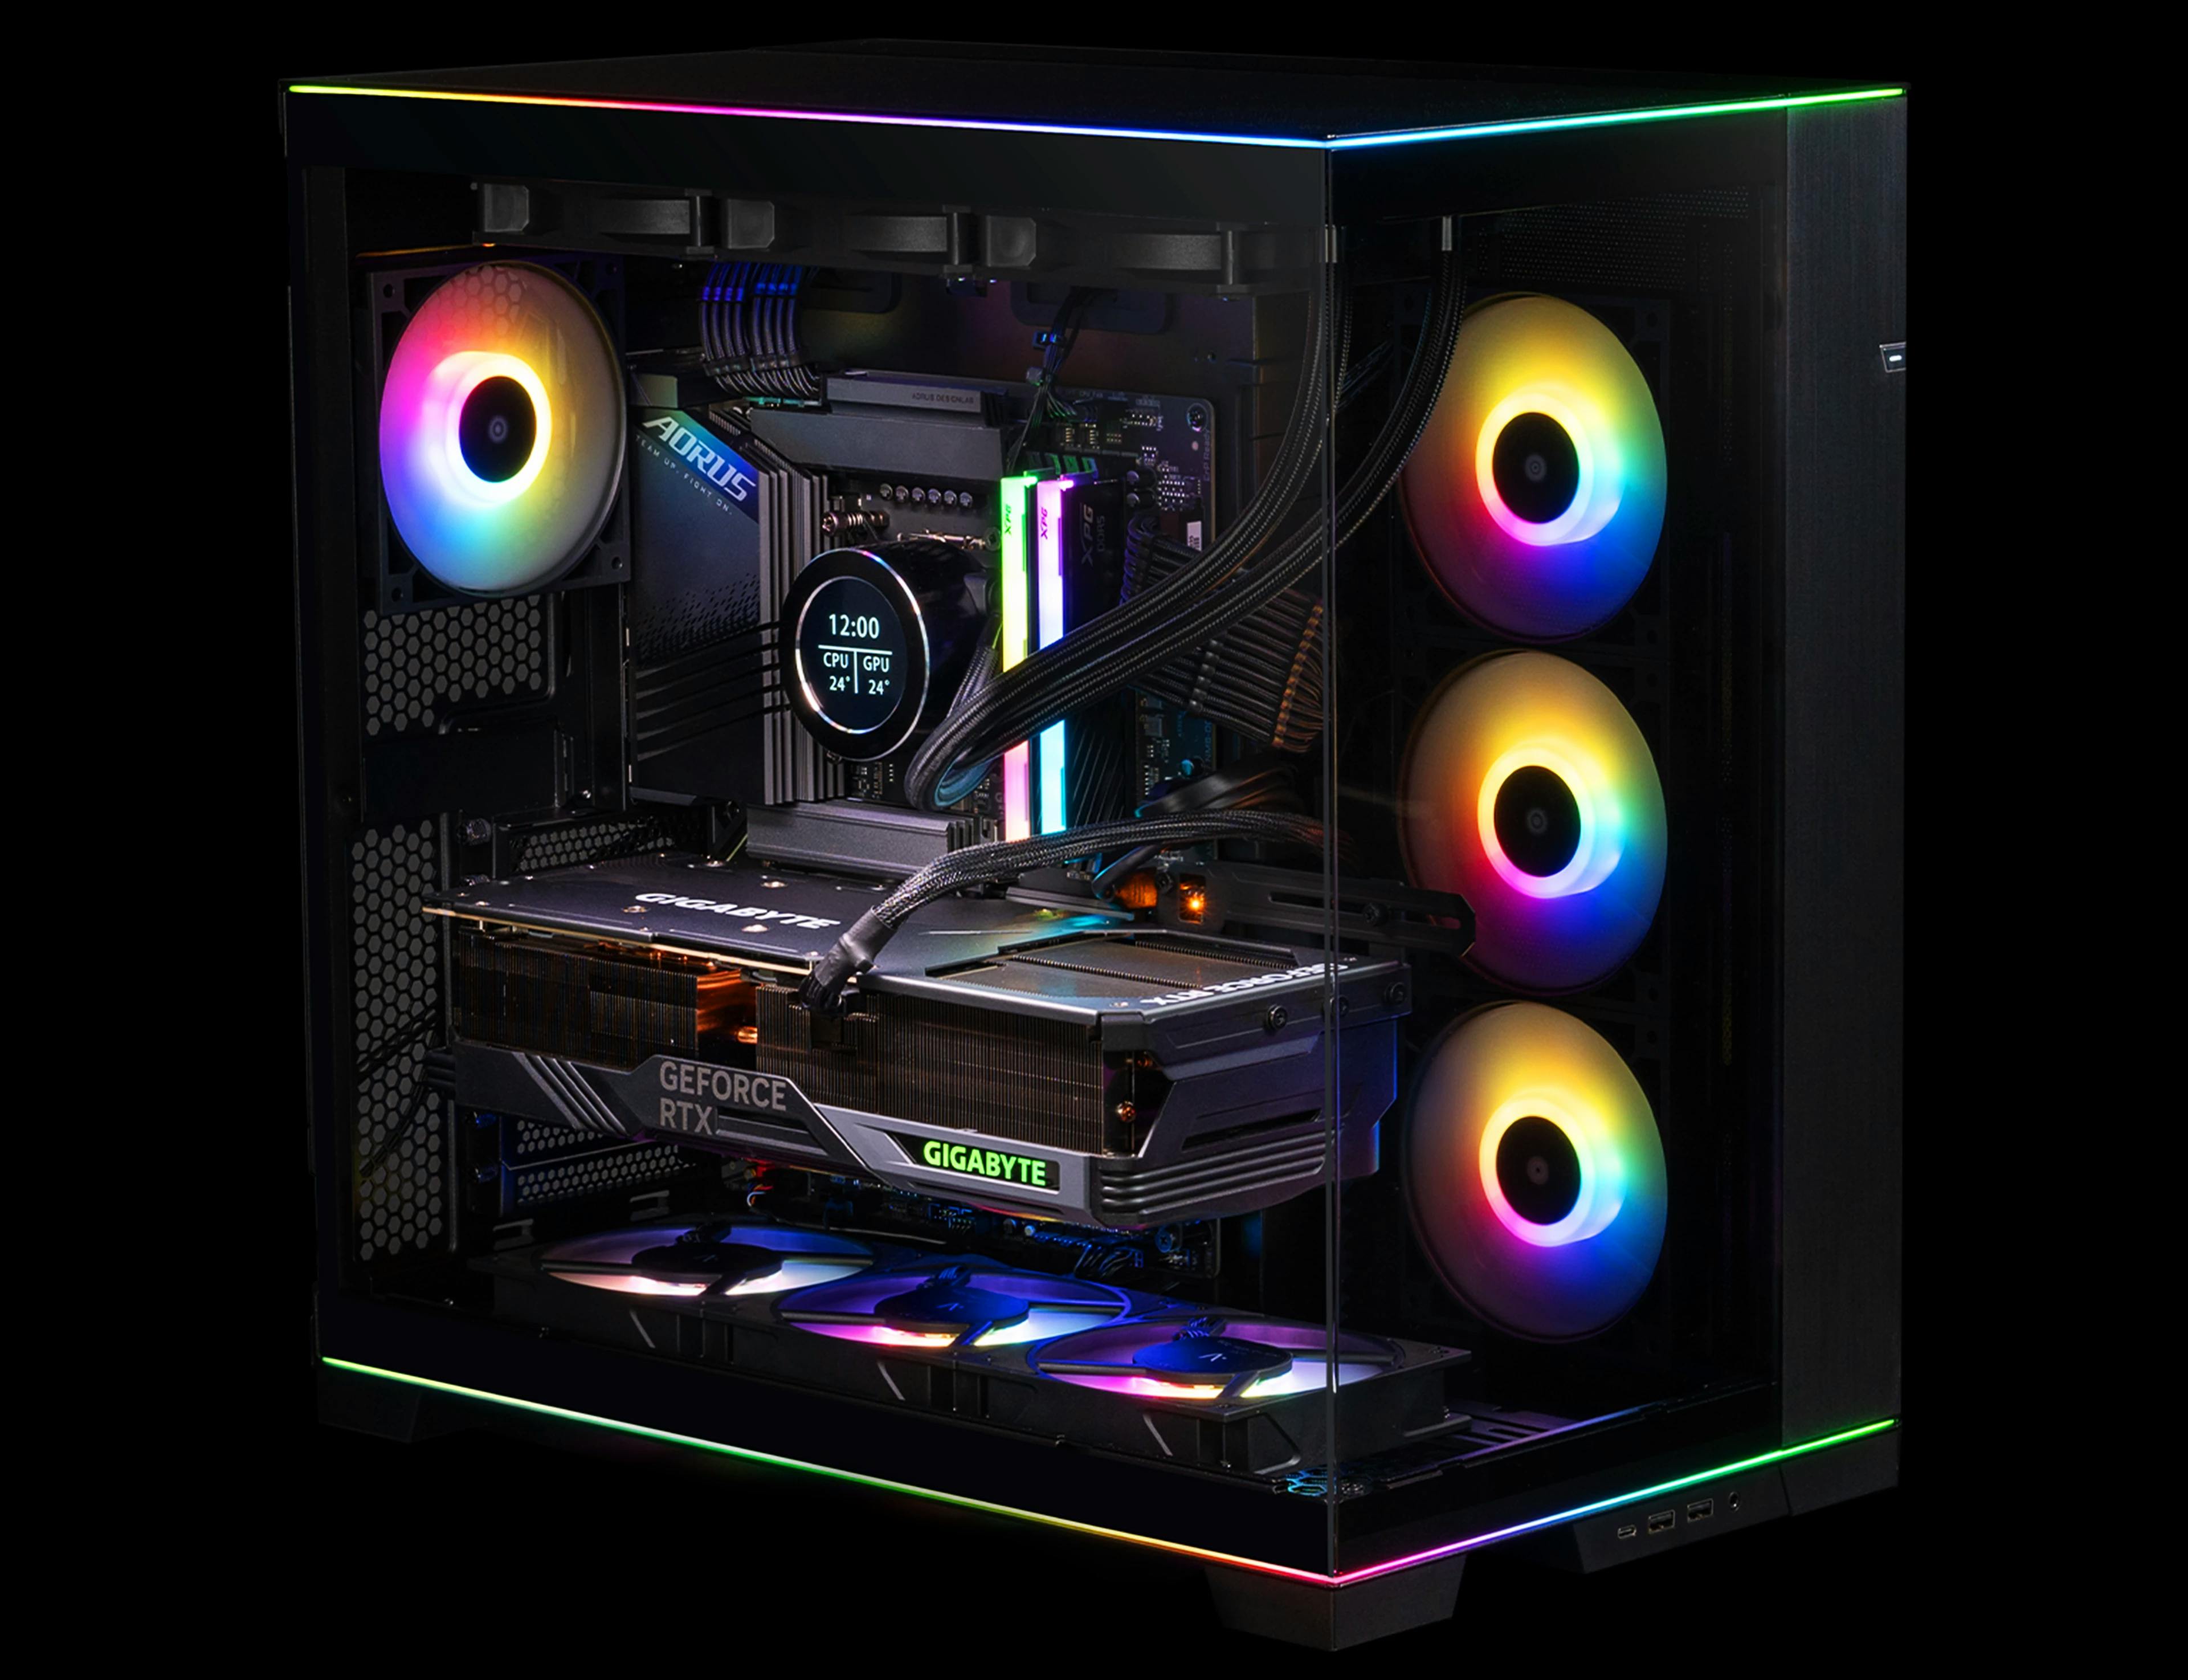 RGB STRIPS ON THE TOP AND BOTTOM